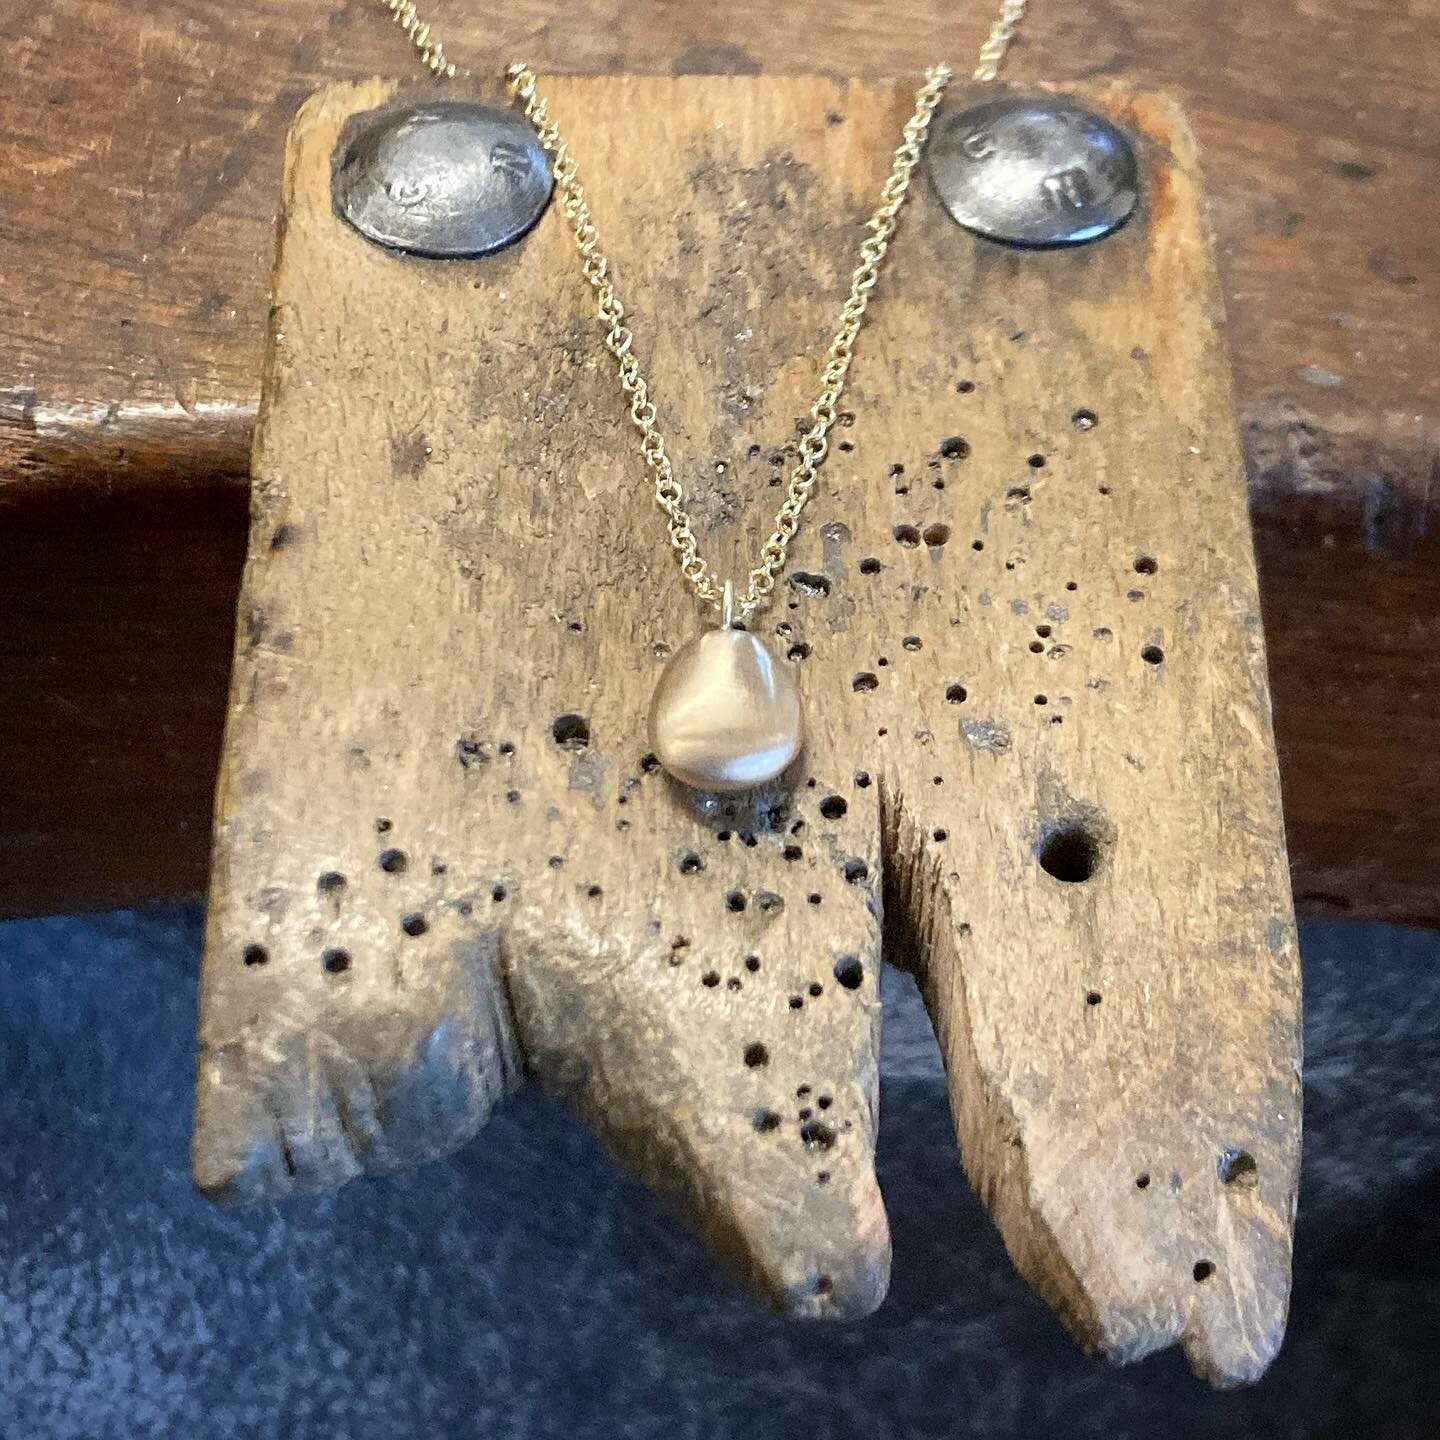 Little gold &lsquo;pearl&rsquo; drop pendant made from a client&rsquo;s leftover wedding ring workshop metal to start the new year. Super tactile and it has to be said, rather cute! Might start making these more regularly. What do you reckon?
&bull;
